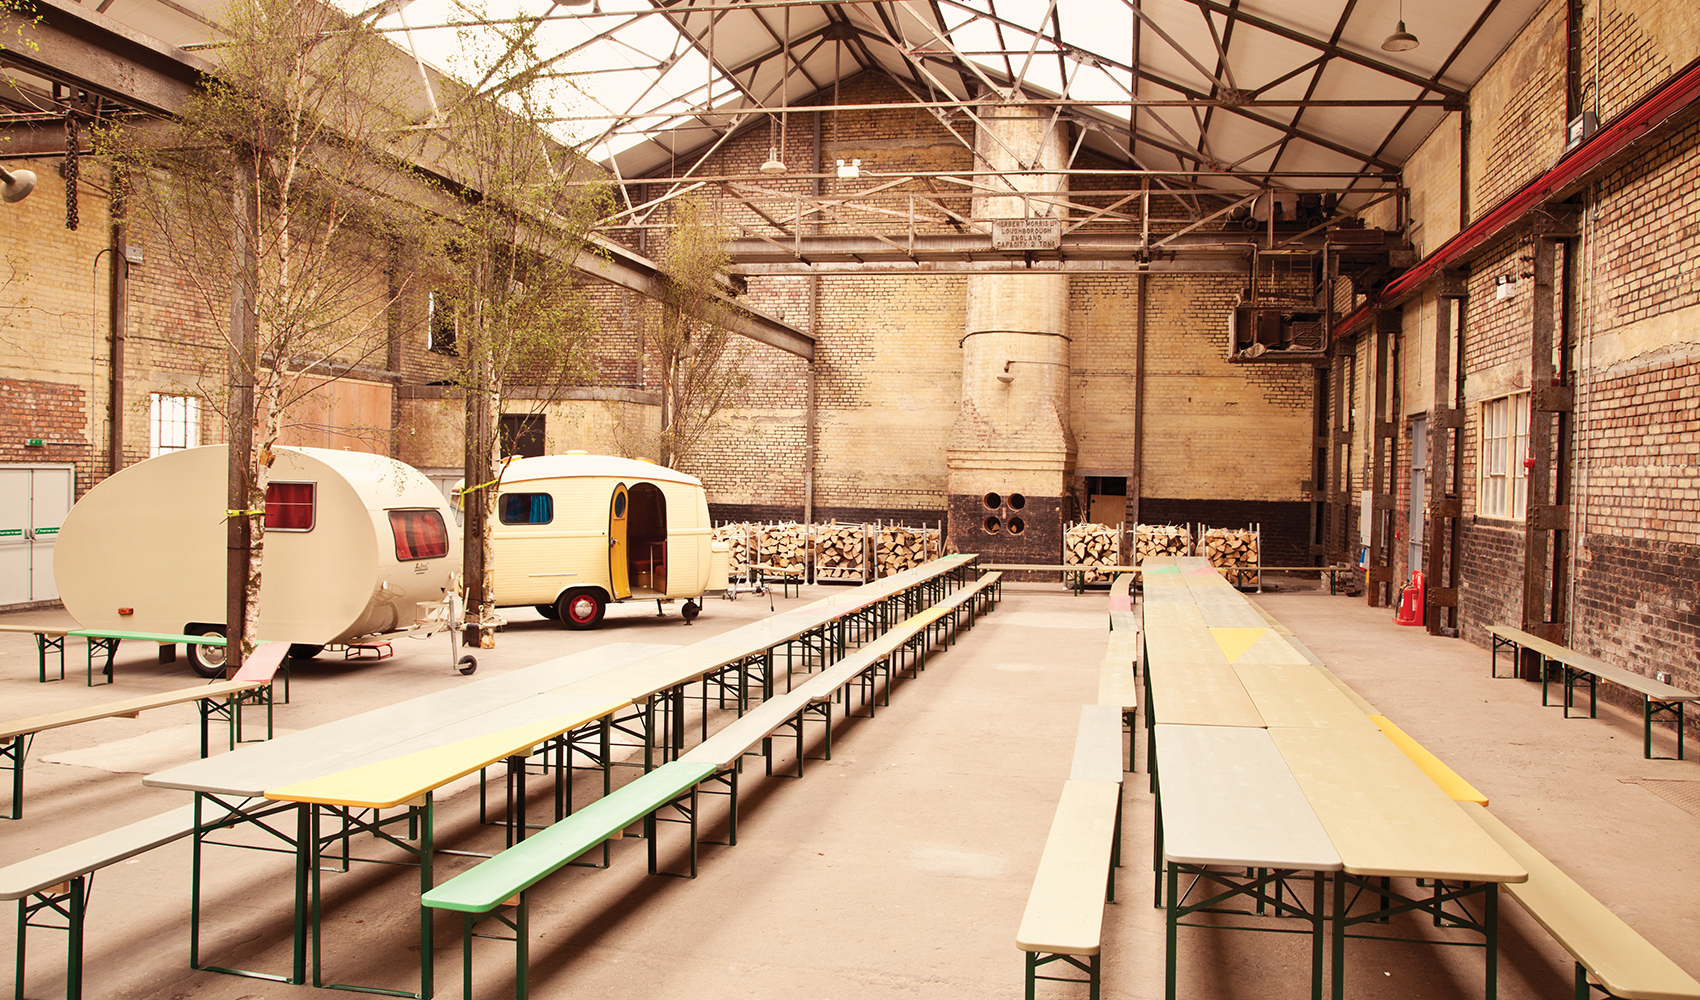 Camp And Furnace: The Great Indoors